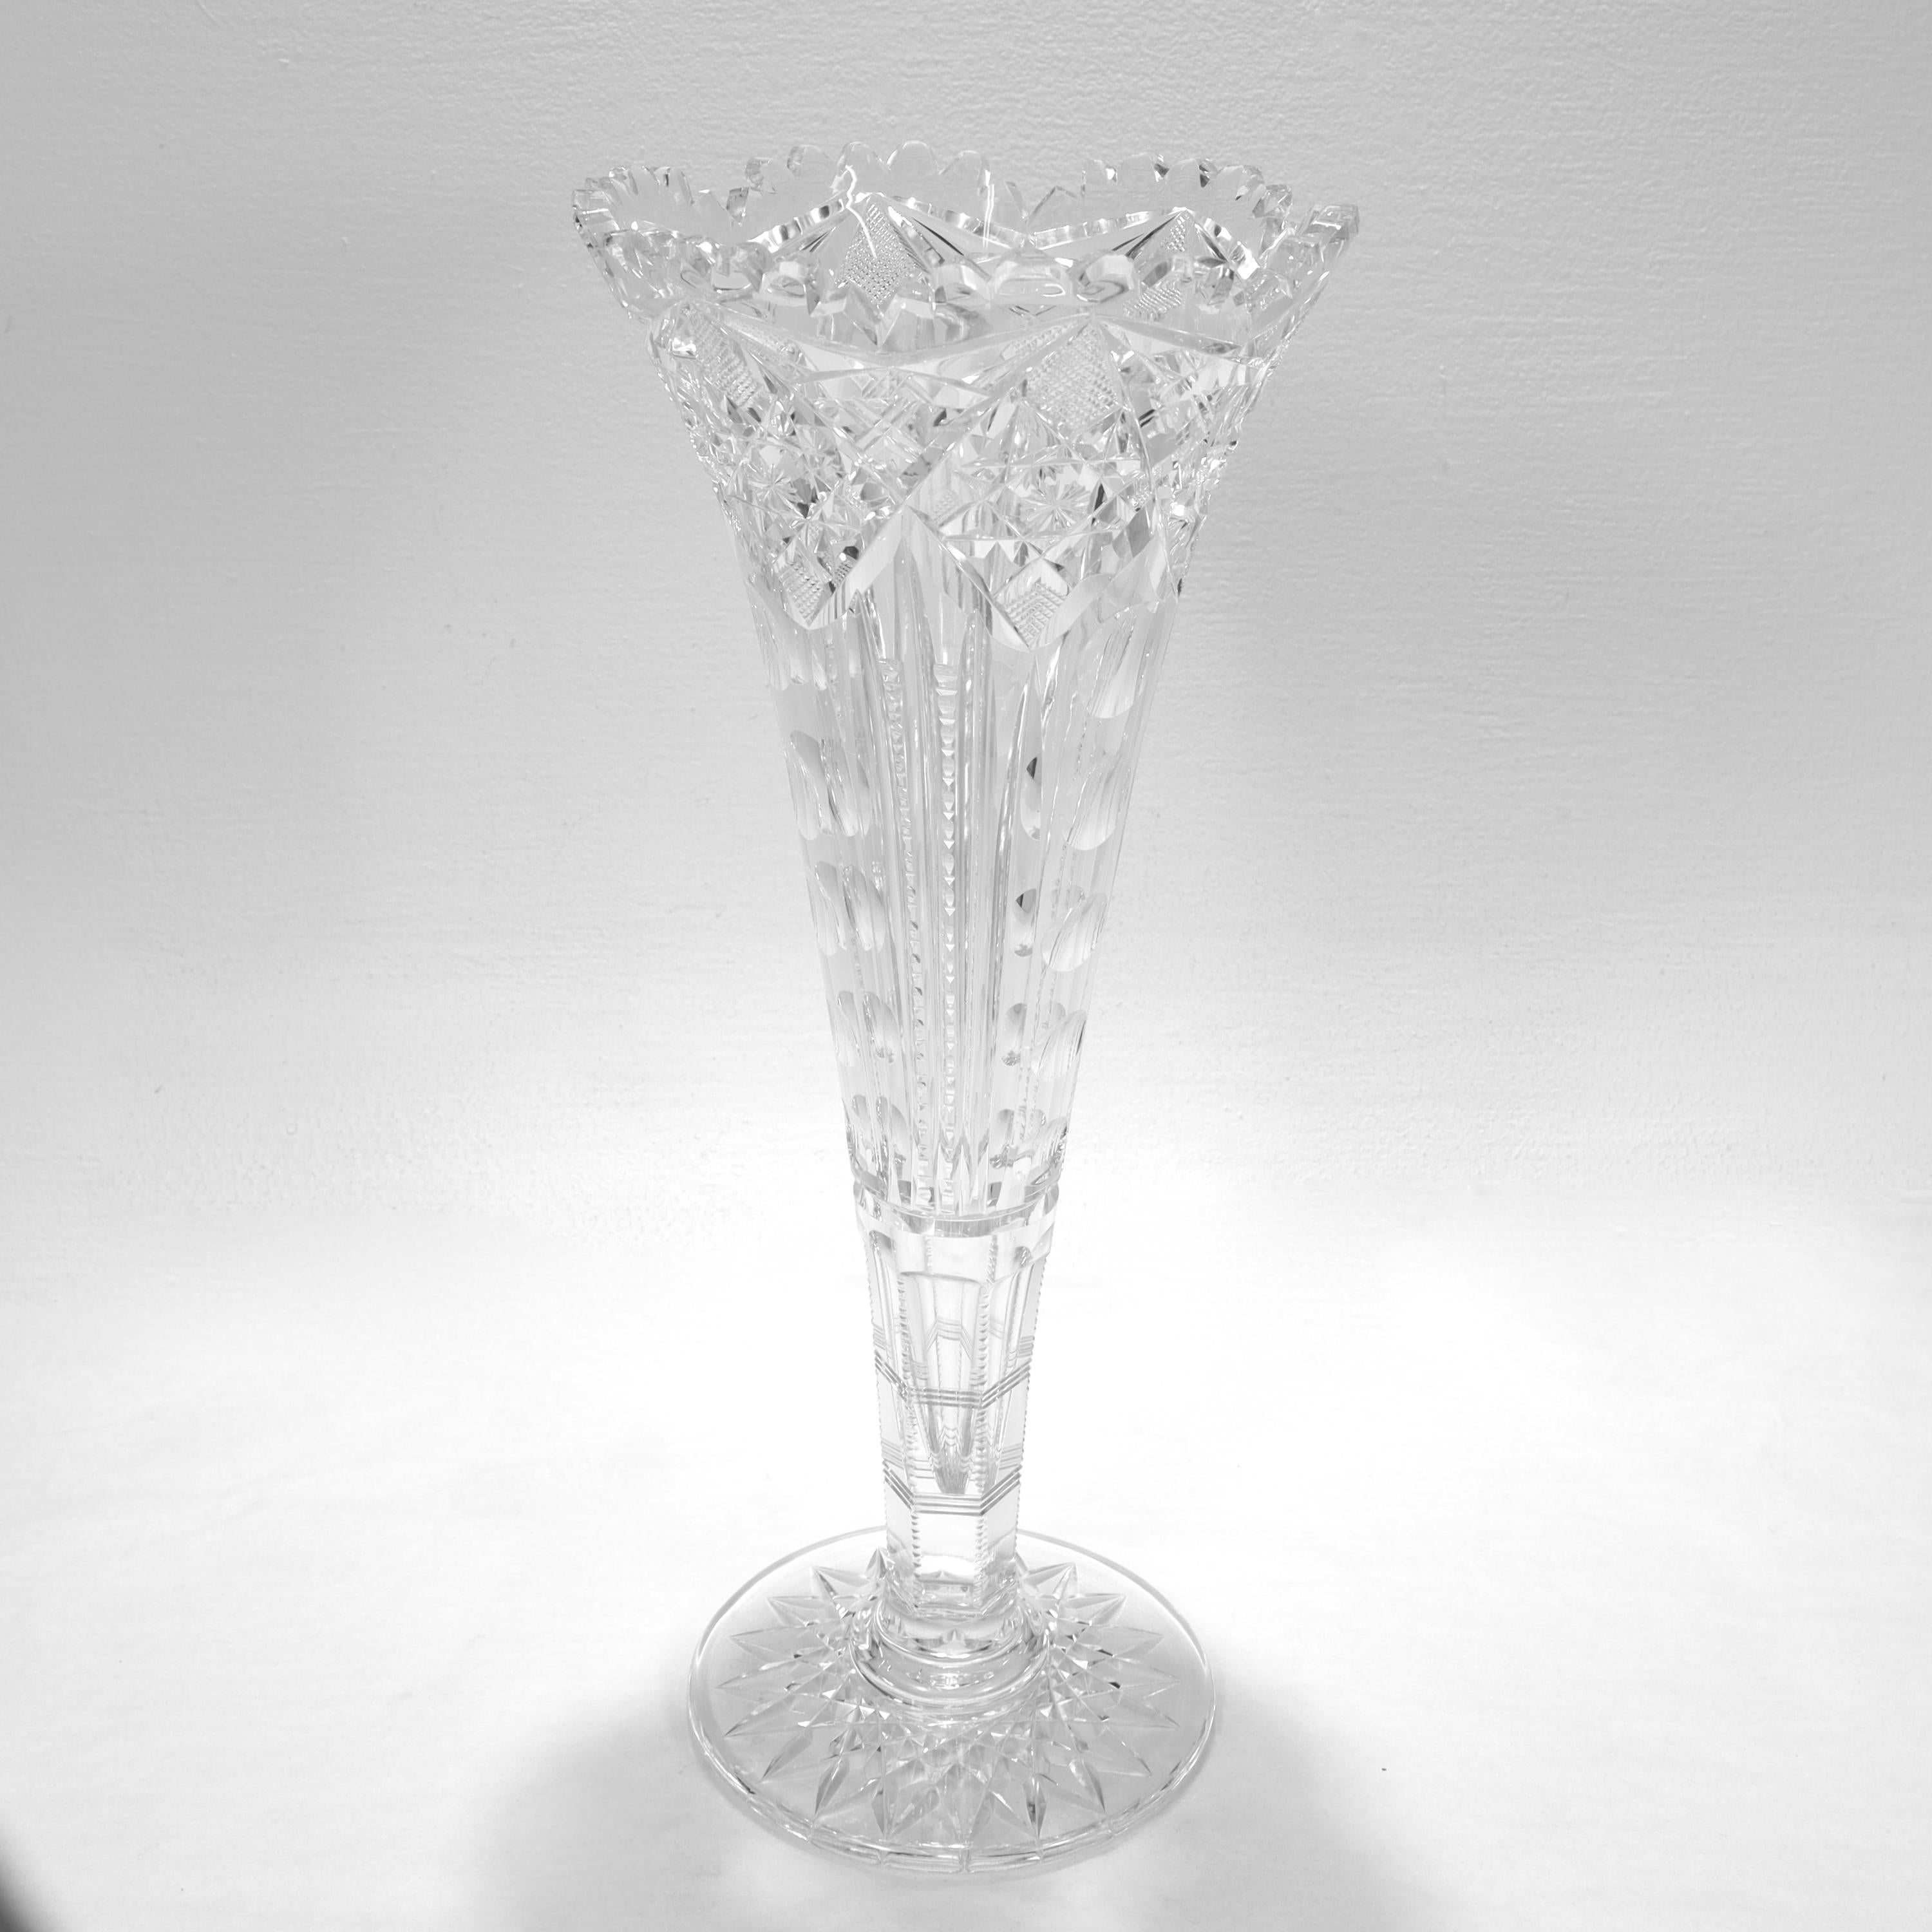 A fine piece of antique American Brilliant Period cut glass. 

In the form of a trumpet vase.

With a star pattern to the base, cut decorative patterns throughout, and a scalloped rim.

Simply a lovely American Brilliant Period